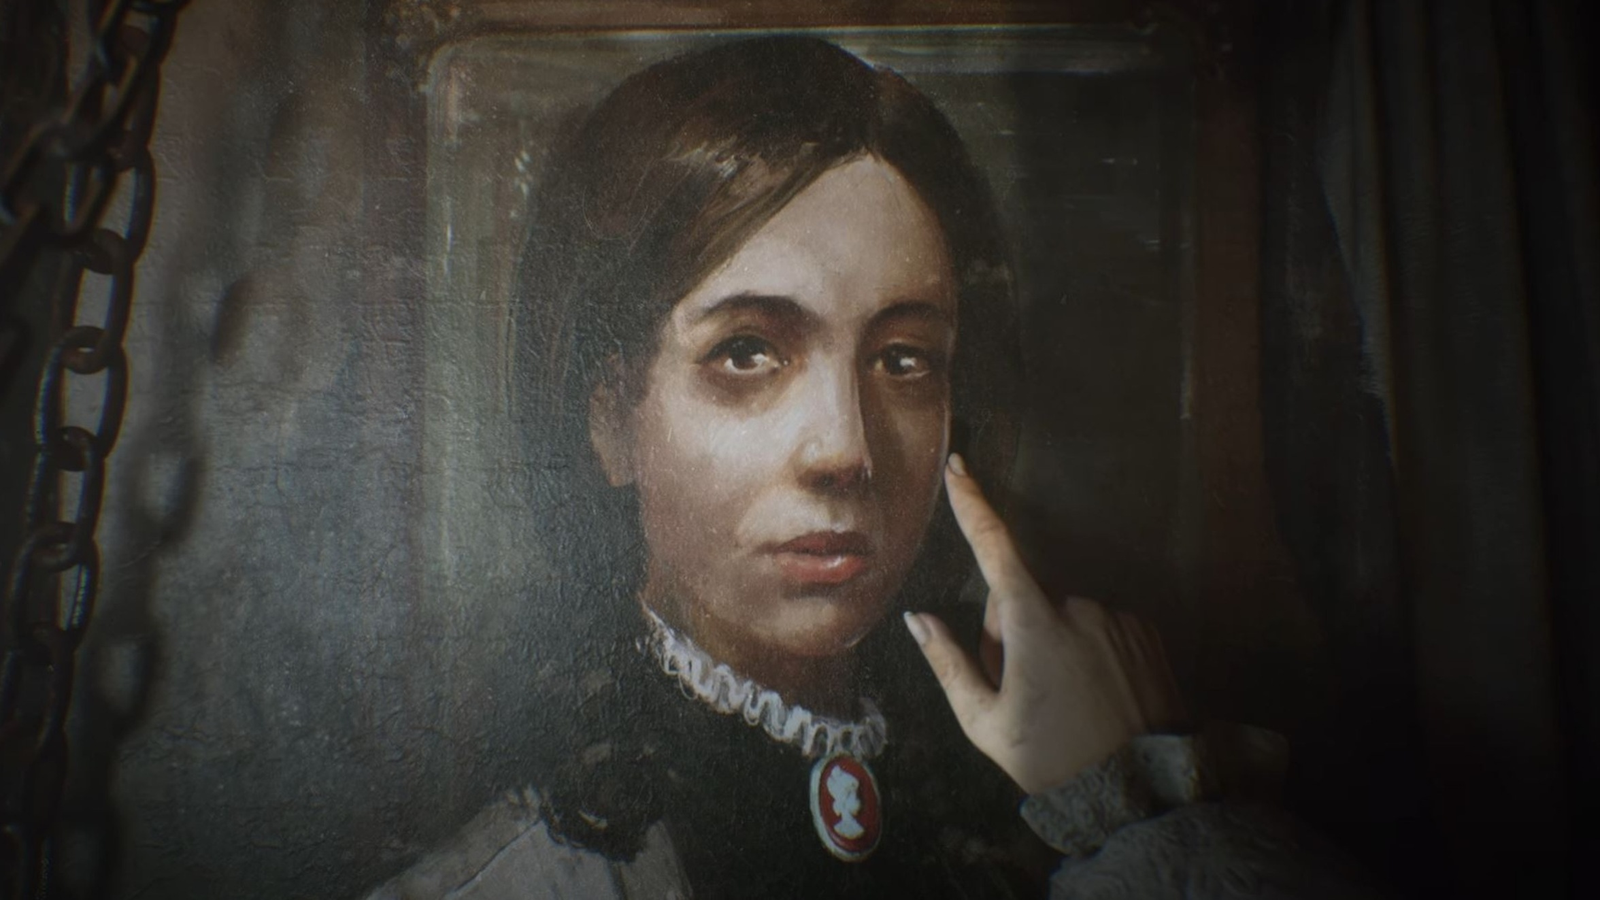 Buy Layers of Fear: Inheritance PC Steam key! Cheap price